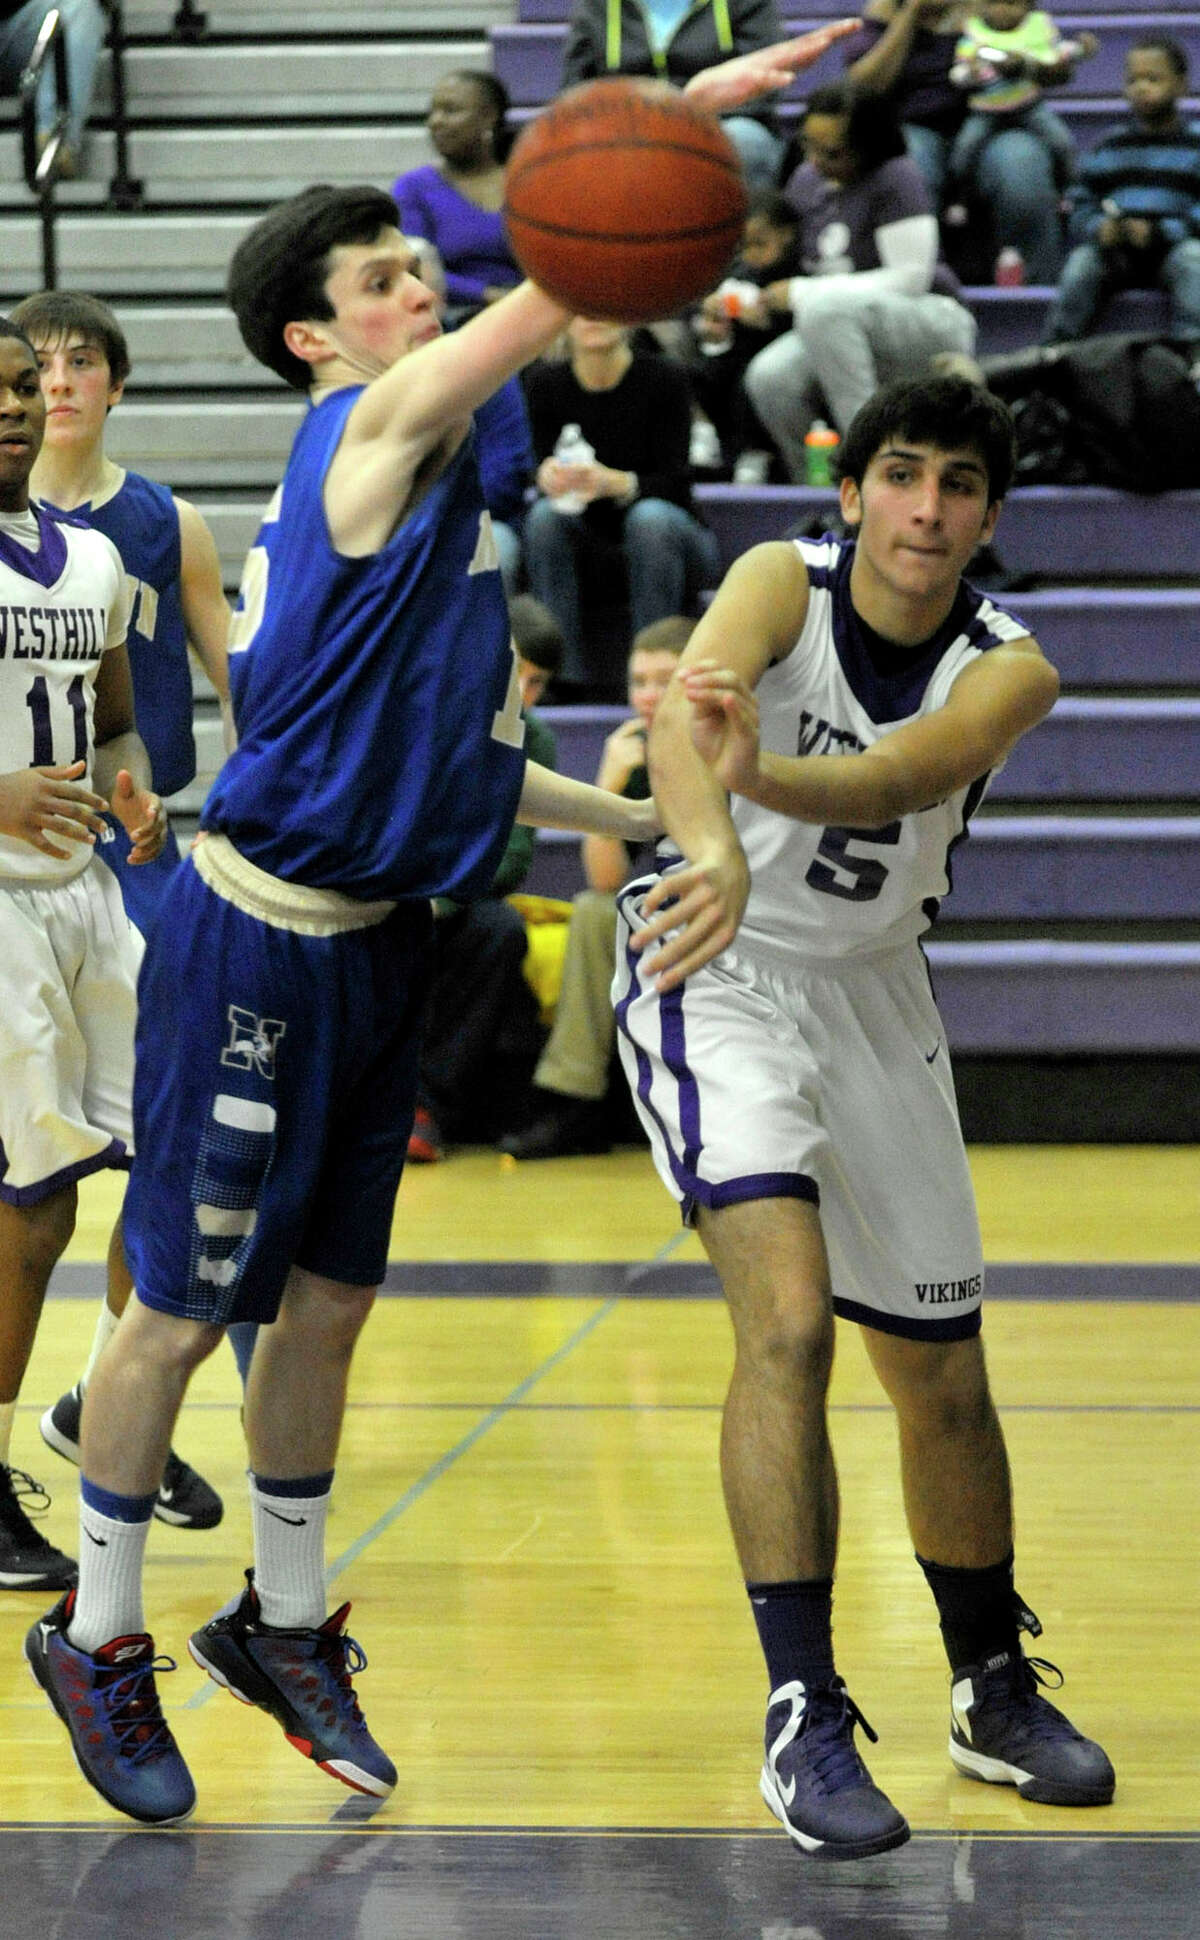 Westhill's Evan Skoparantzas passes the ball while under pressure from Newtown's Gavin Scallon during their game at Westhill High School on Wednesday, March 6, 2013.